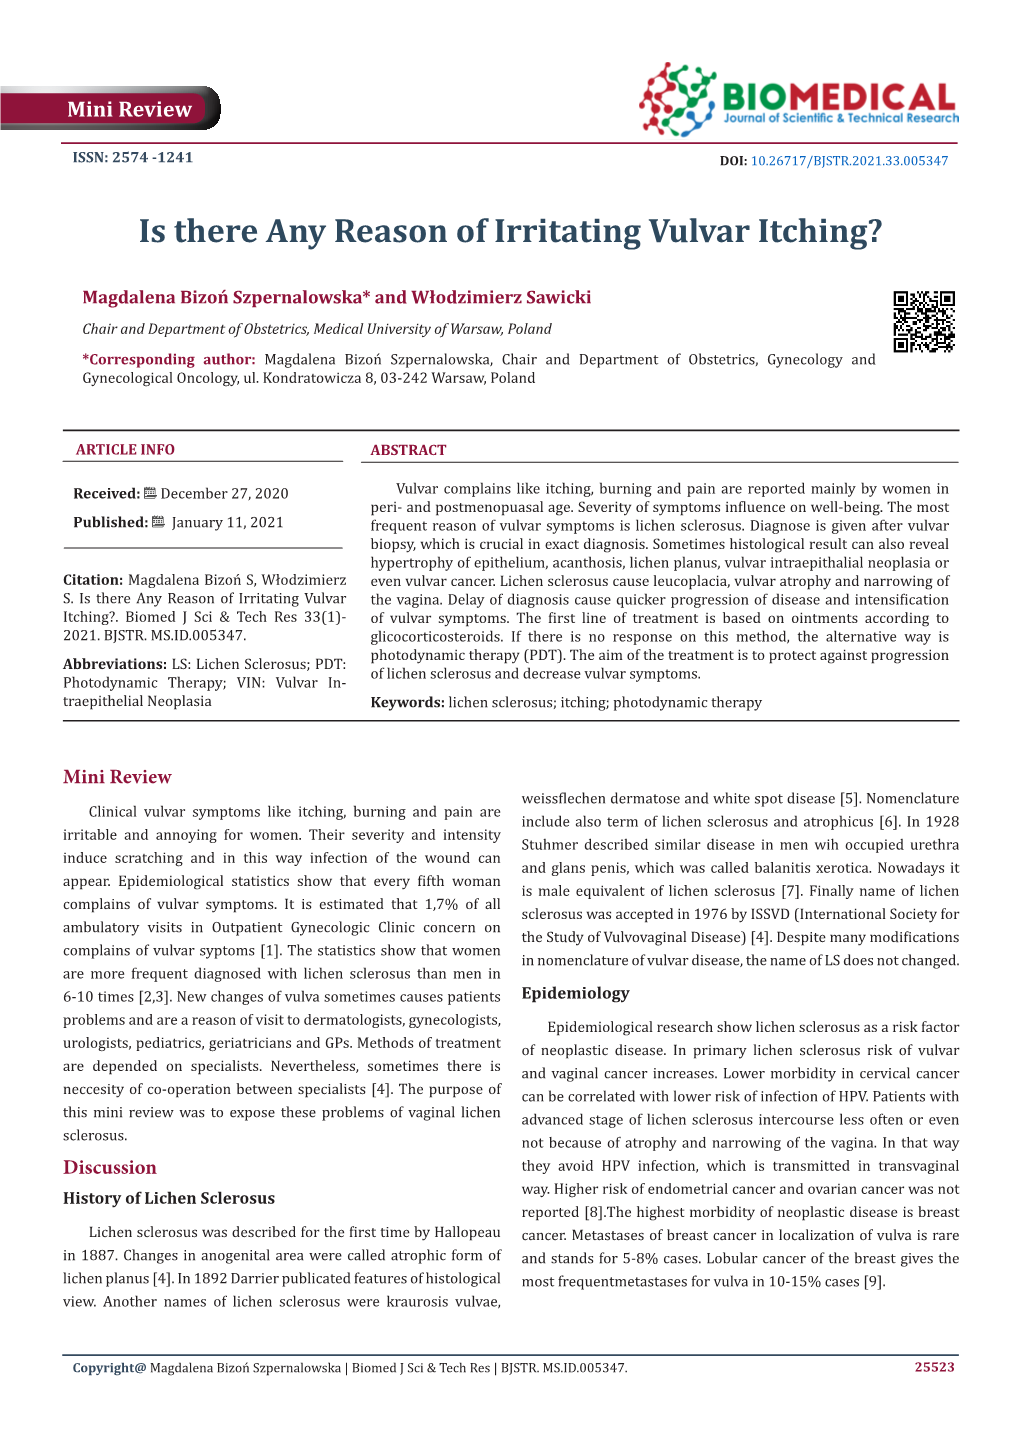 Is There Any Reason of Irritating Vulvar Itching?